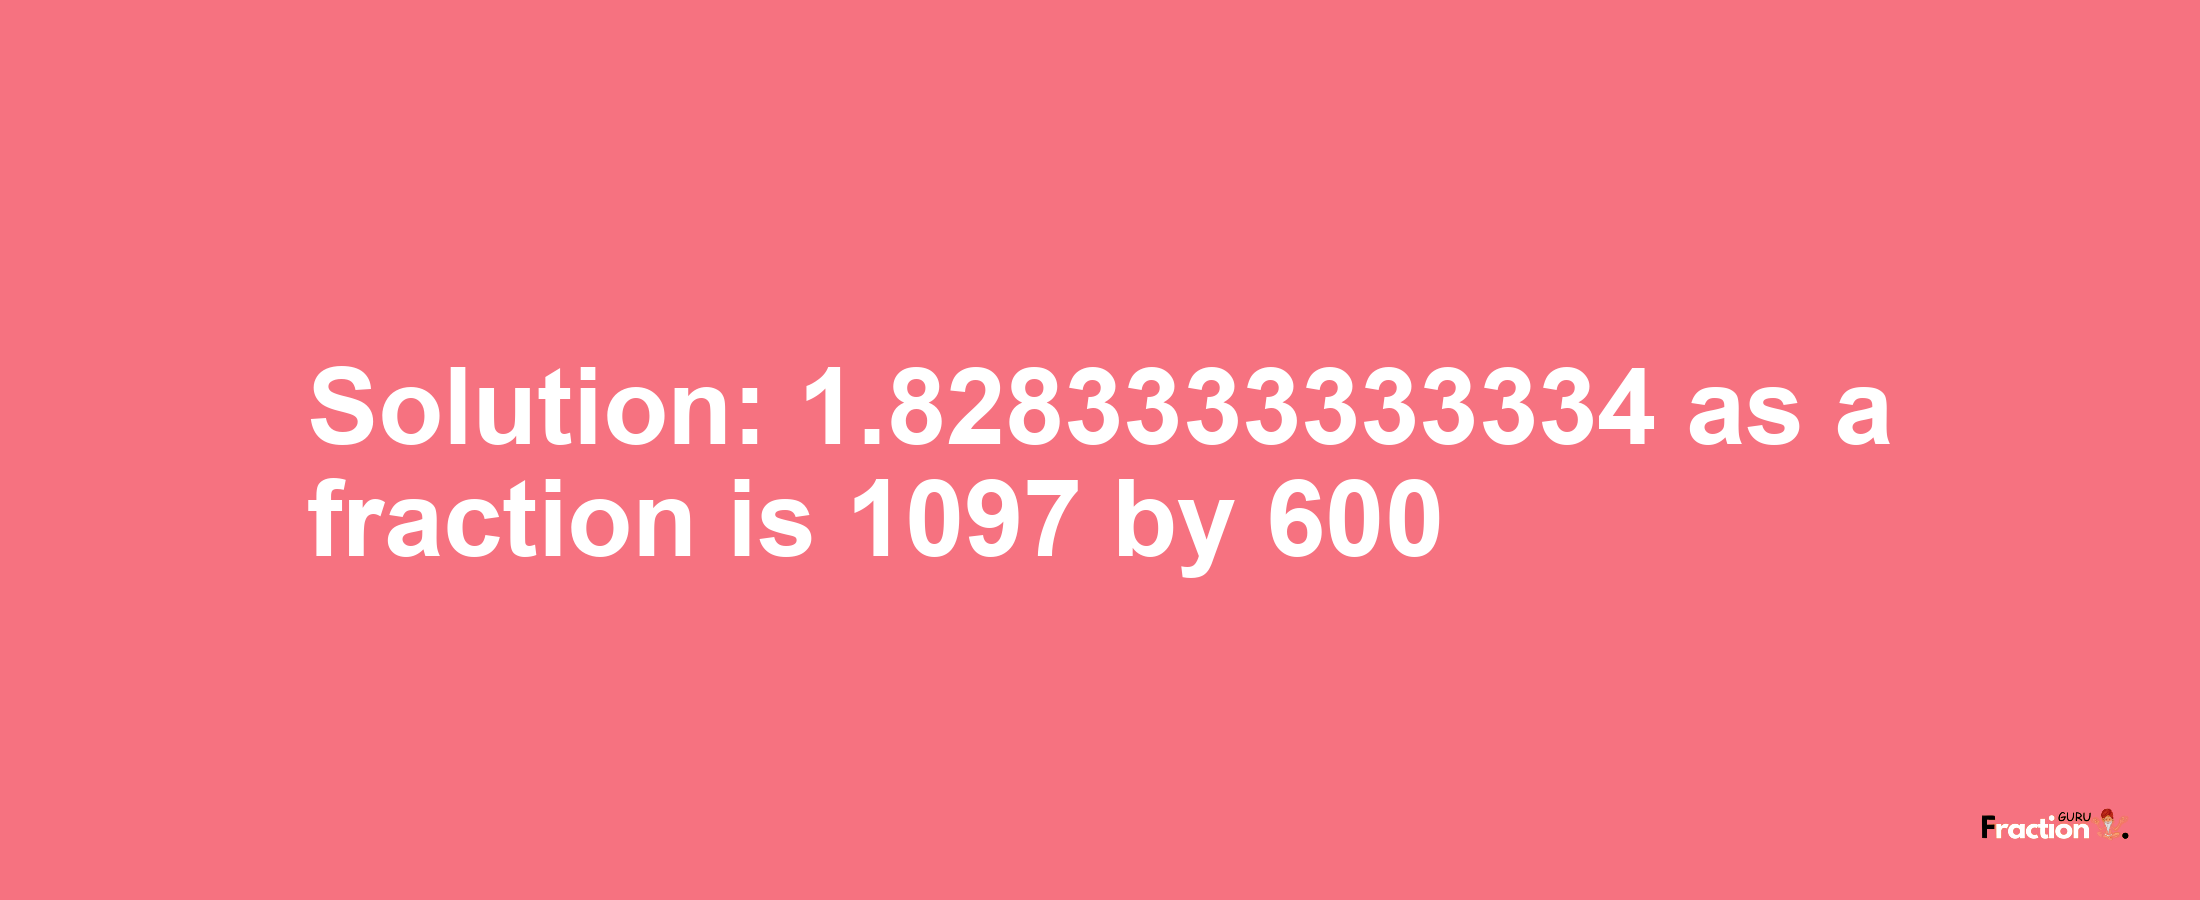 Solution:1.8283333333334 as a fraction is 1097/600